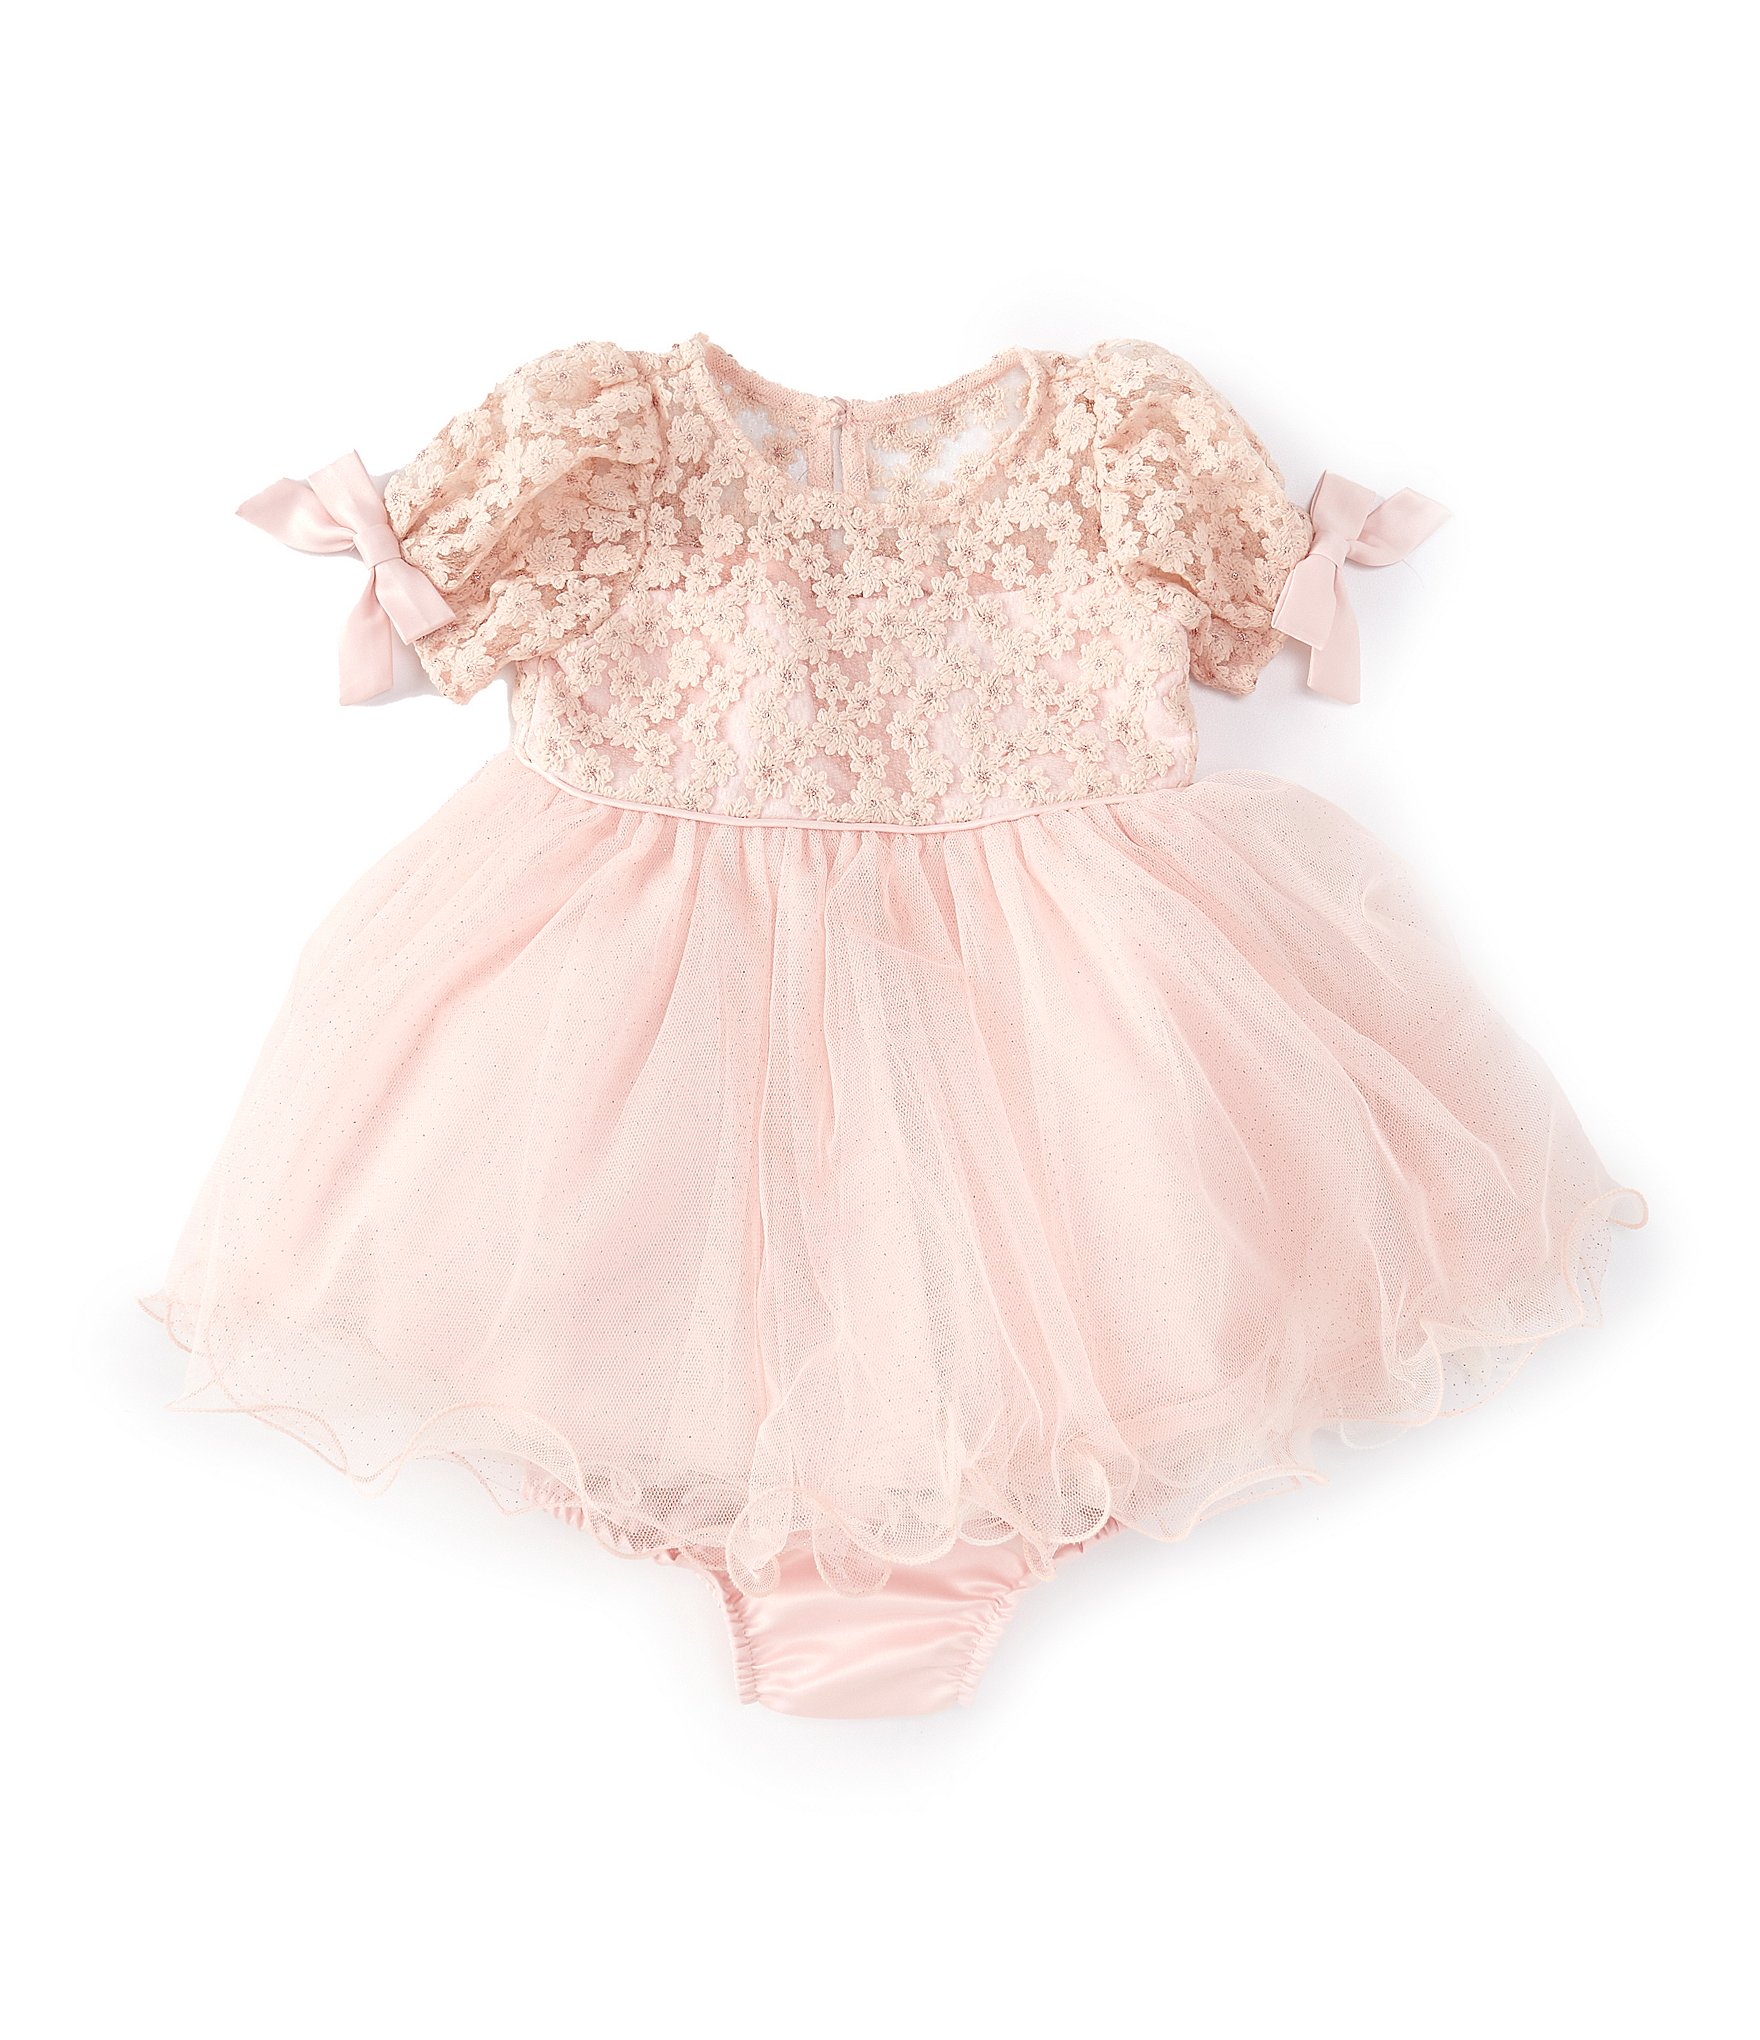 Meli-Melo Embroidered Dress S00 - New - For Baby